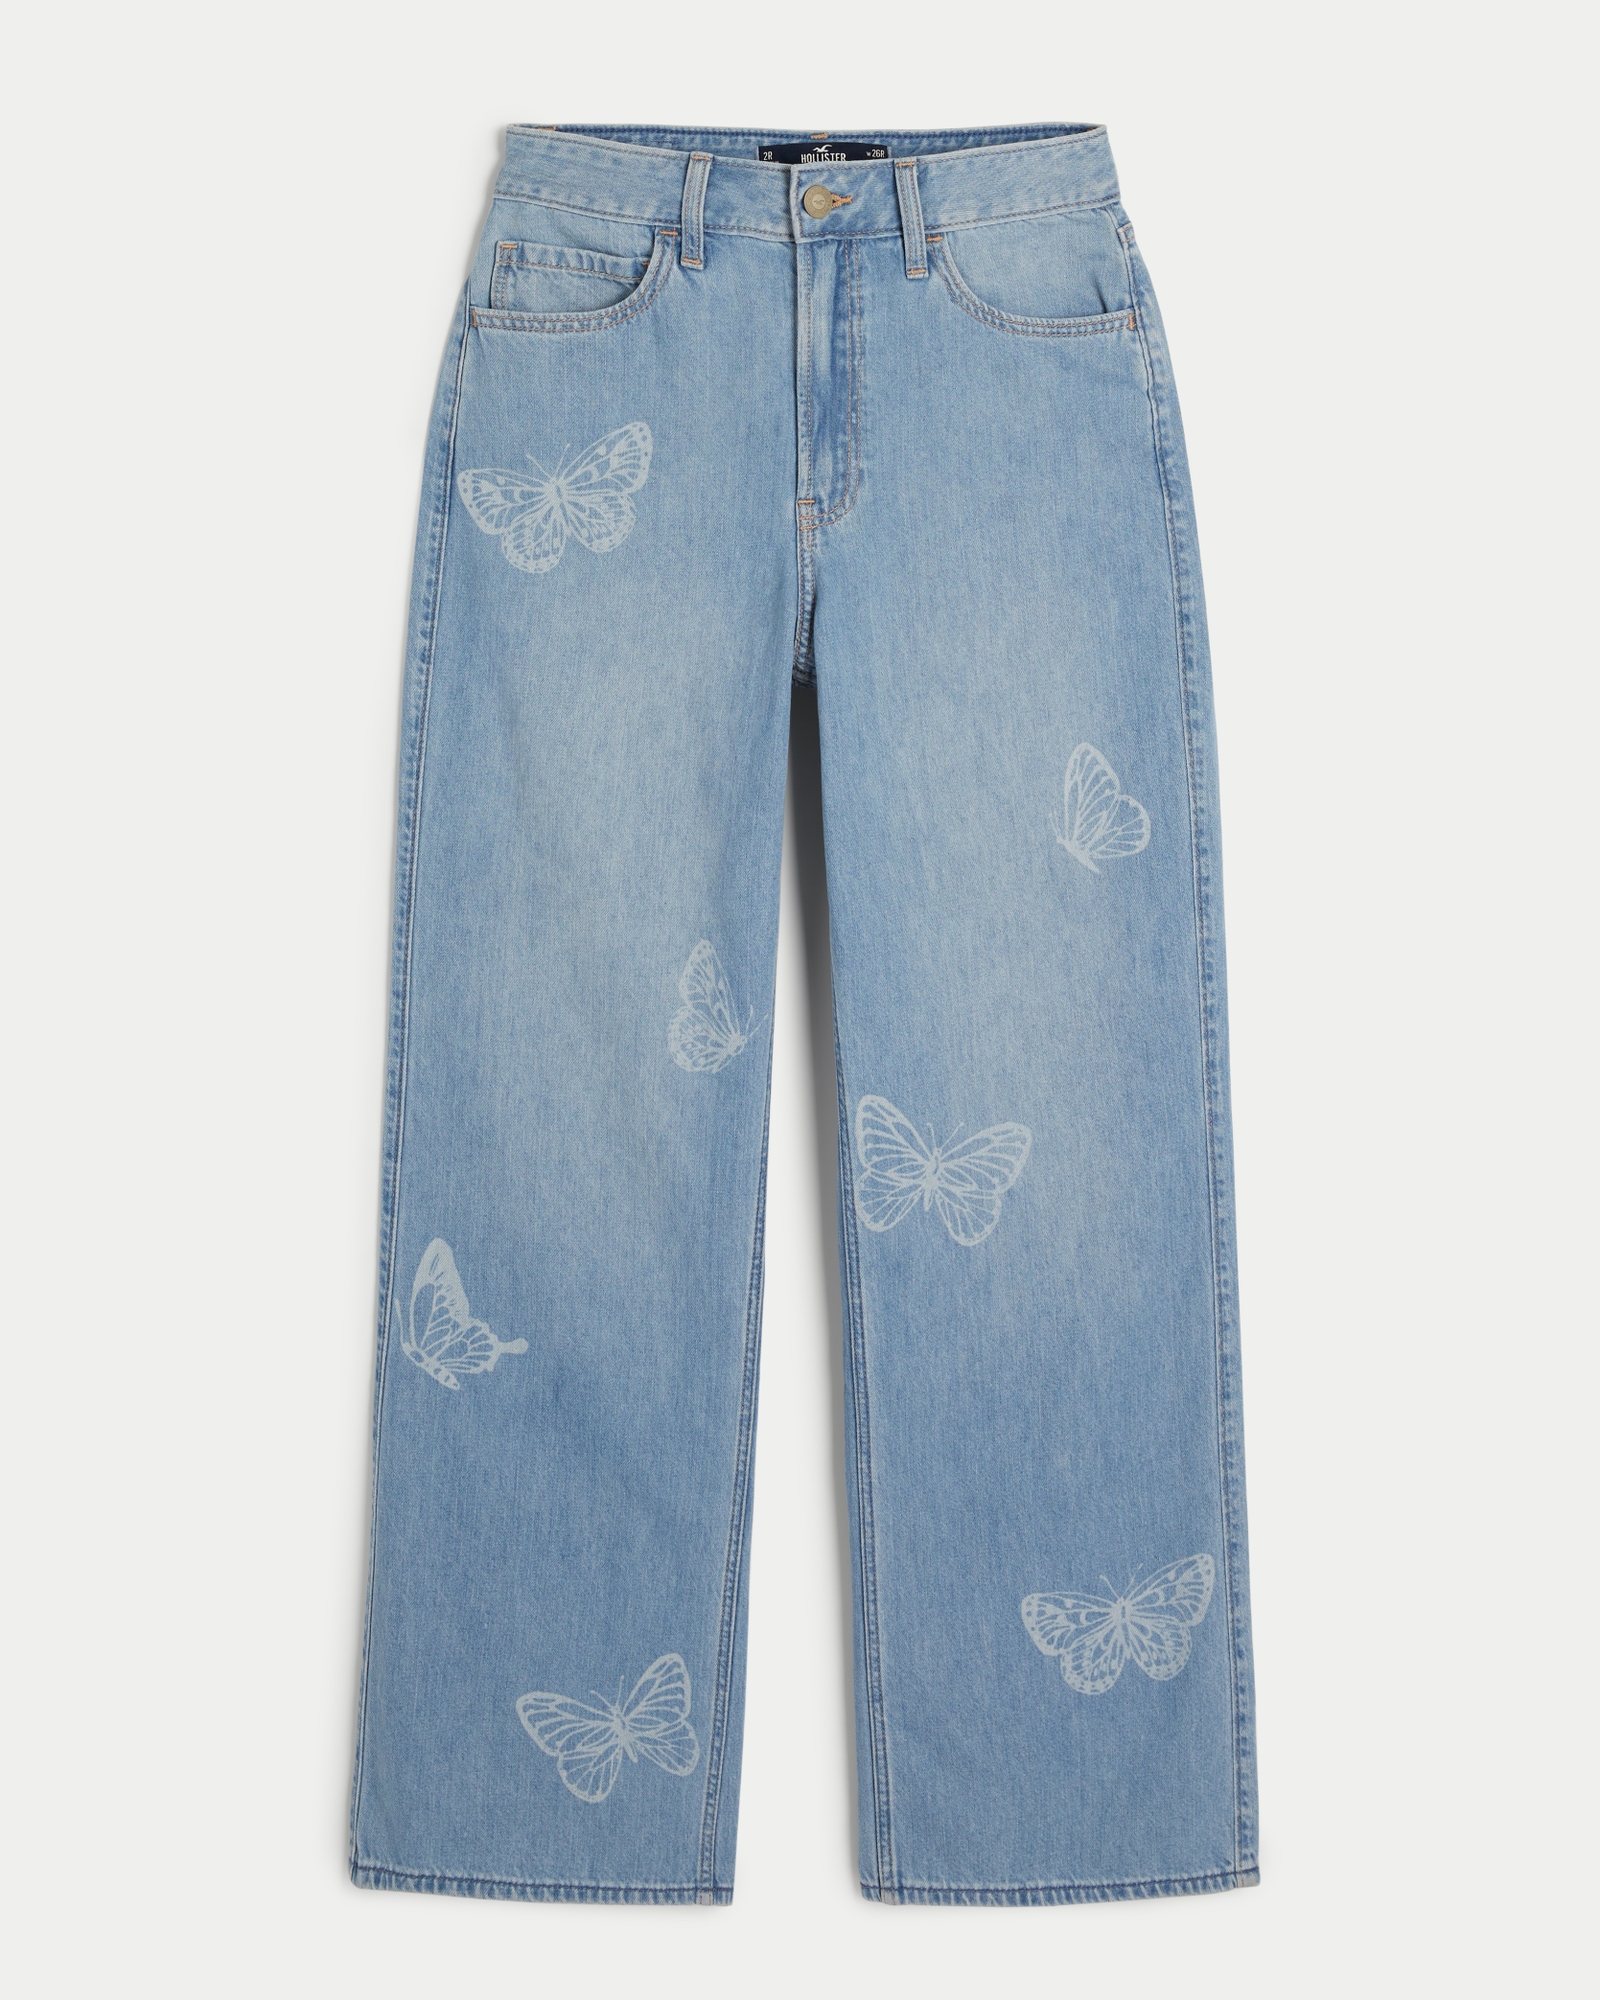 https://img.hollisterco.com/is/image/anf/KIC_355-3275-6778-278_prod1.jpg?policy=product-extra-large